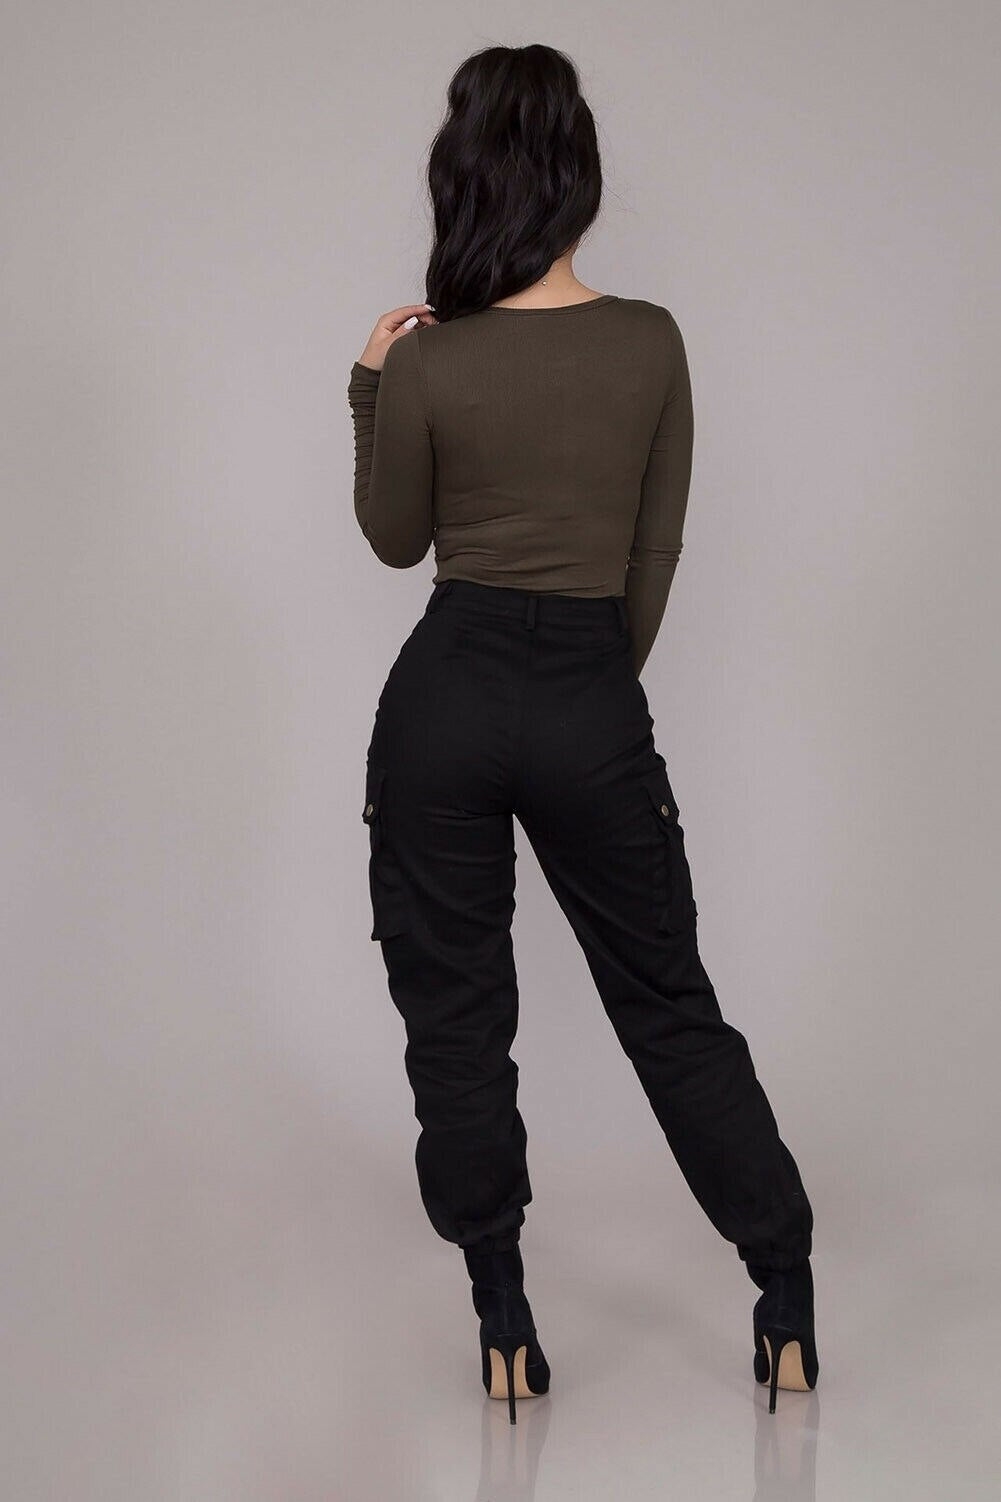 "Upgrade your style with these chic high-waisted black cargo pants featuring button pockets and a gothic twist. These solid color, long trousers are perfect for all sizes. Get yours now!"